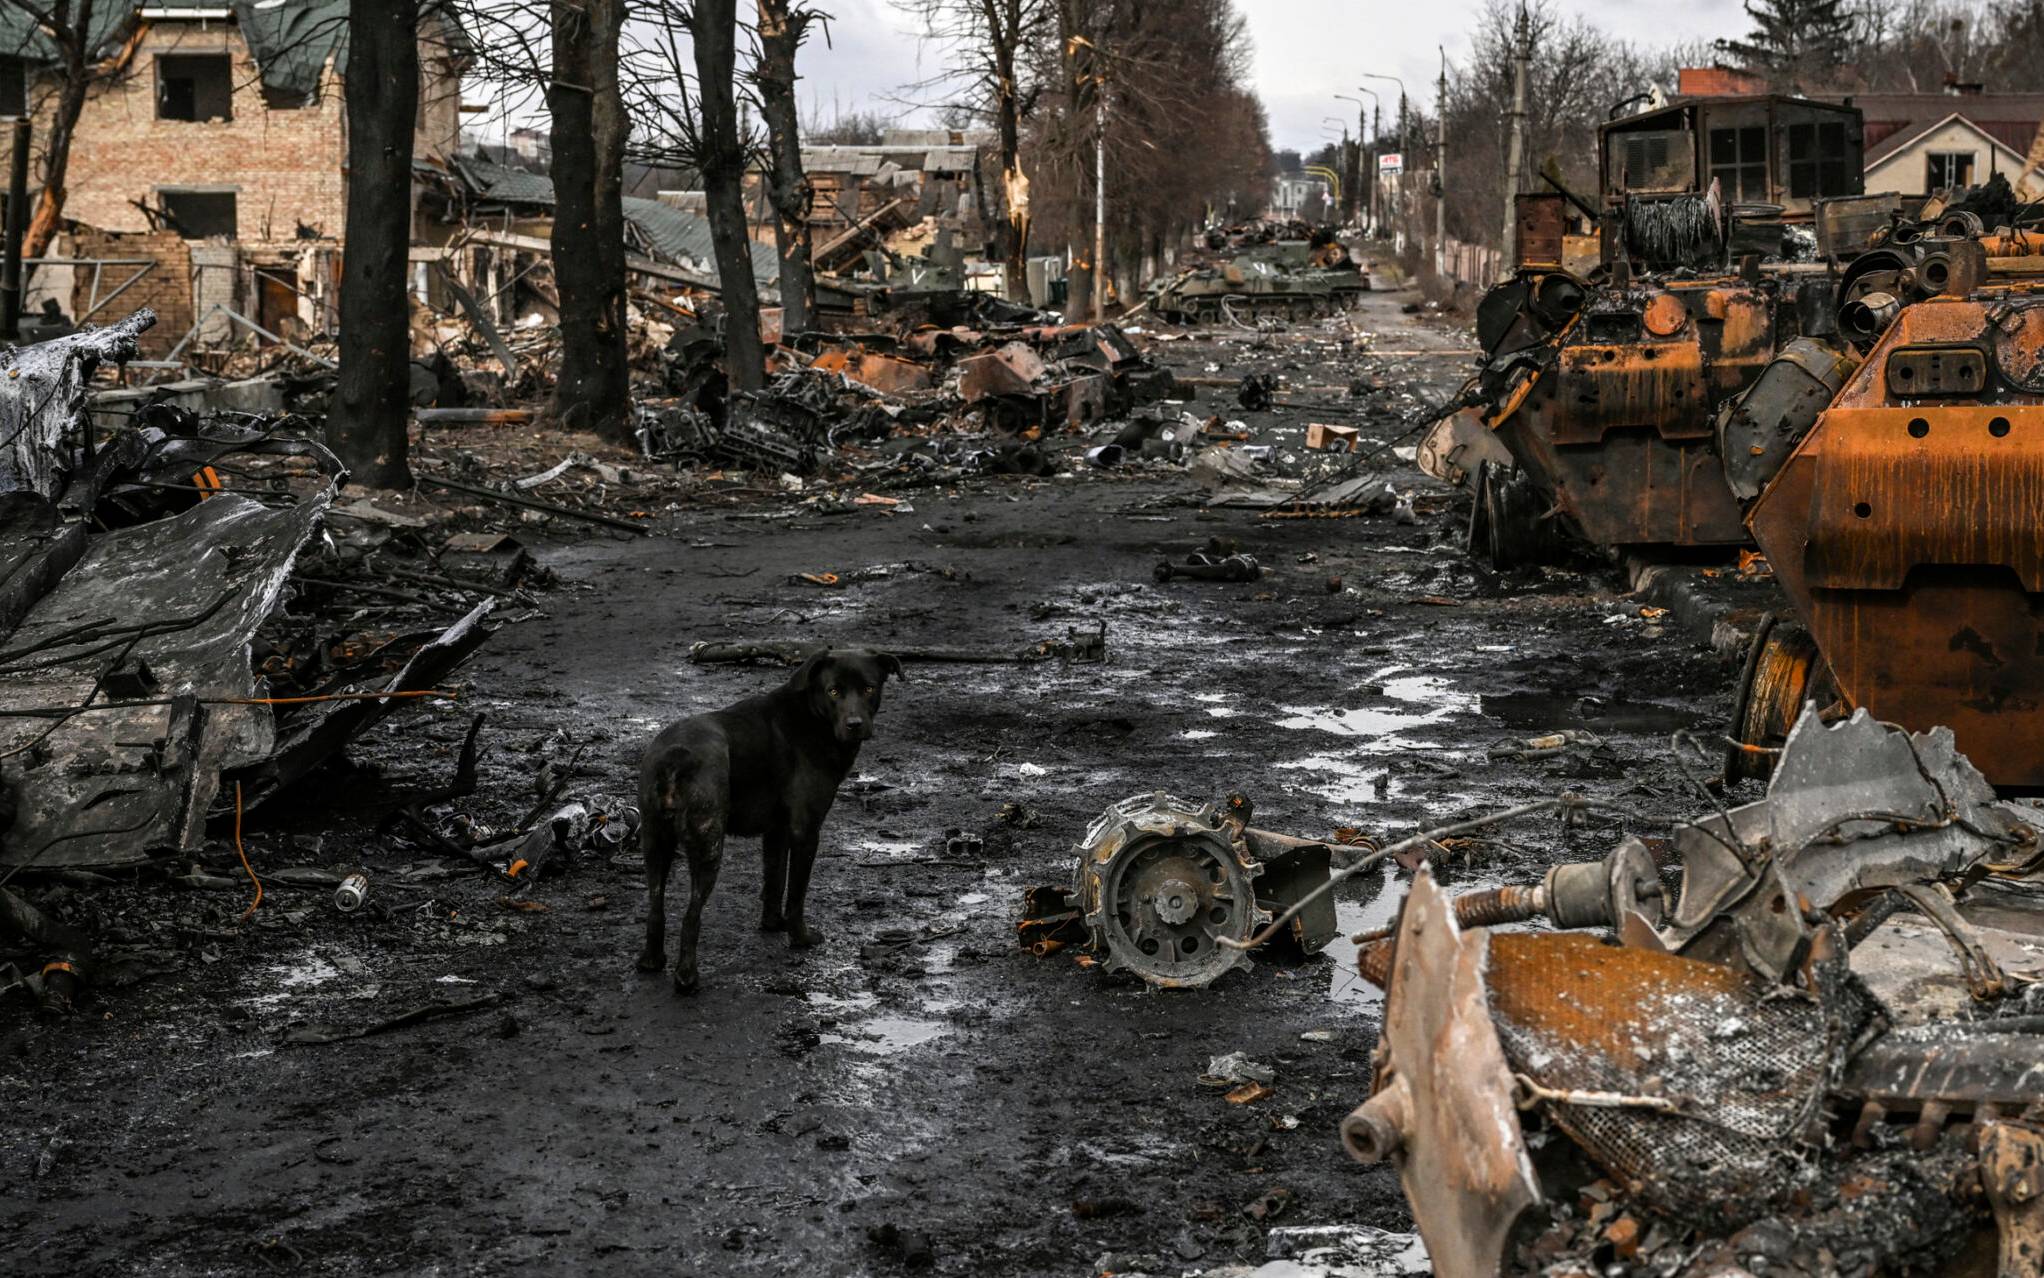 A dog stands between destroyed Russian armored vehicles in the city of Bucha, west of Kyiv, on March 4, 2022. - The UN Human Rights Council on March 4, 2022, overwhelmingly voted to create a top-level investigation into violations committed following Russia's invasion of Ukraine. More than 1.2 million people have fled Ukraine into neighbouring countries since Russia launched its full-scale invasion on February 24, United Nations figures showed on March 4, 2022. (Photo by ARIS MESSINIS / AFP)